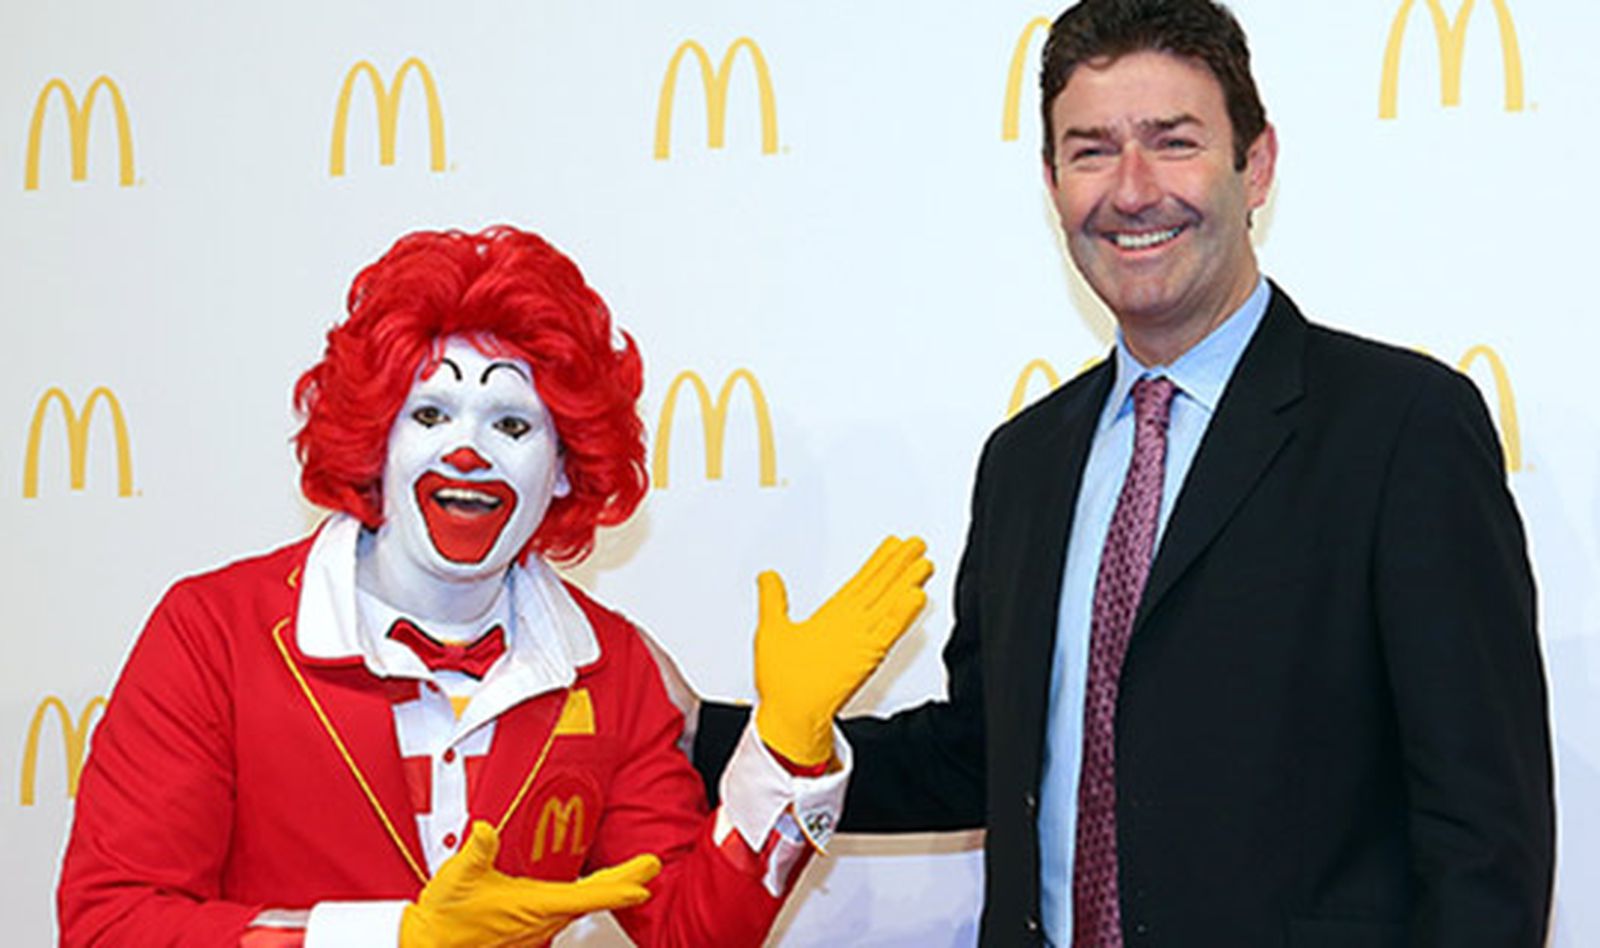 McDonald's Ex-CEO fined for allegedly misleading investors about his firing